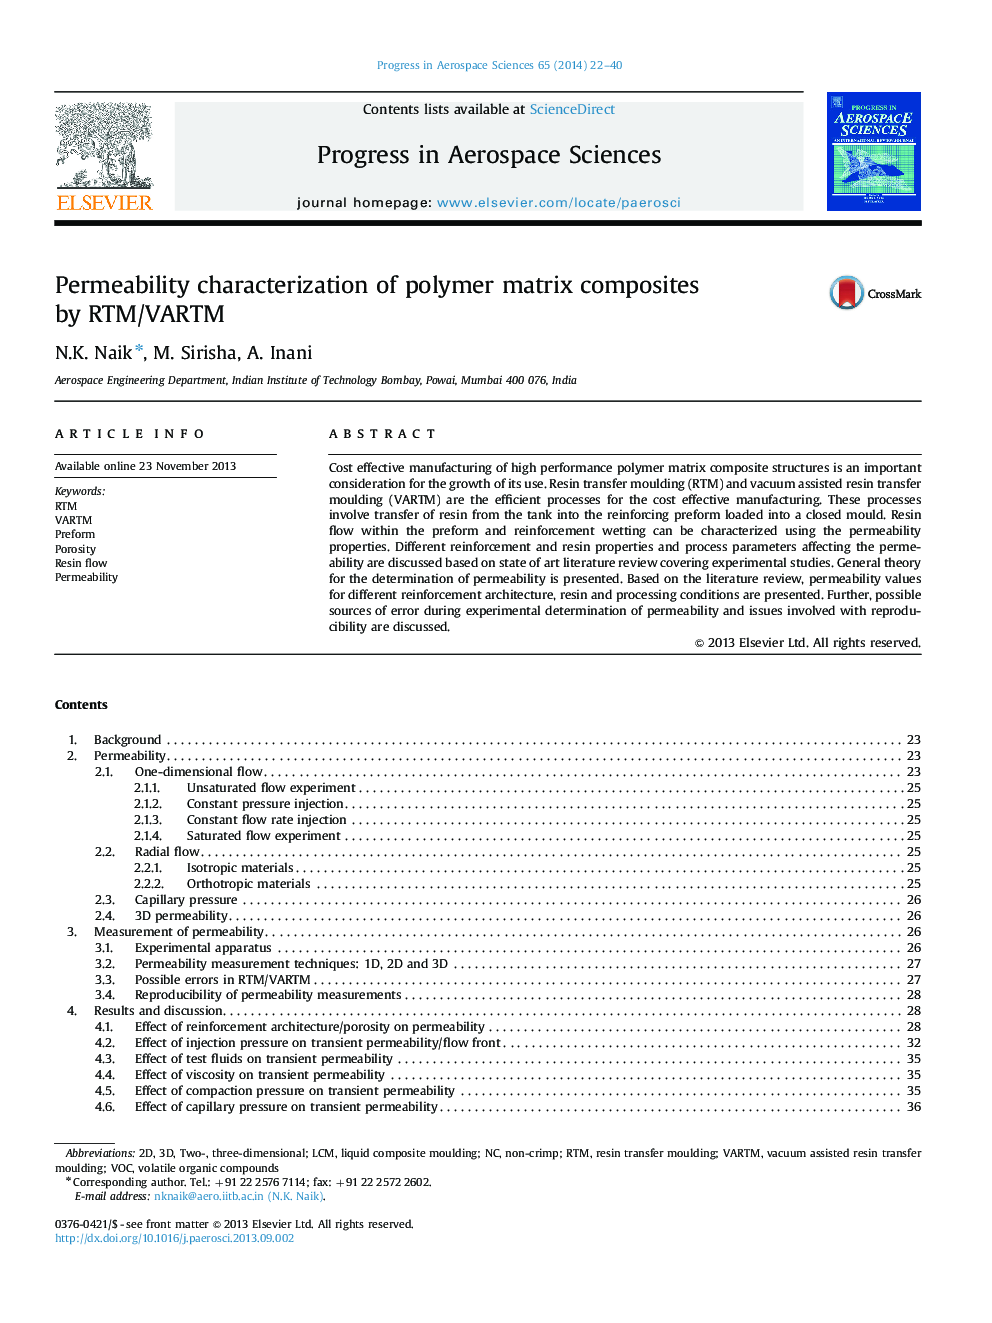 Permeability characterization of polymer matrix composites by RTM/VARTM